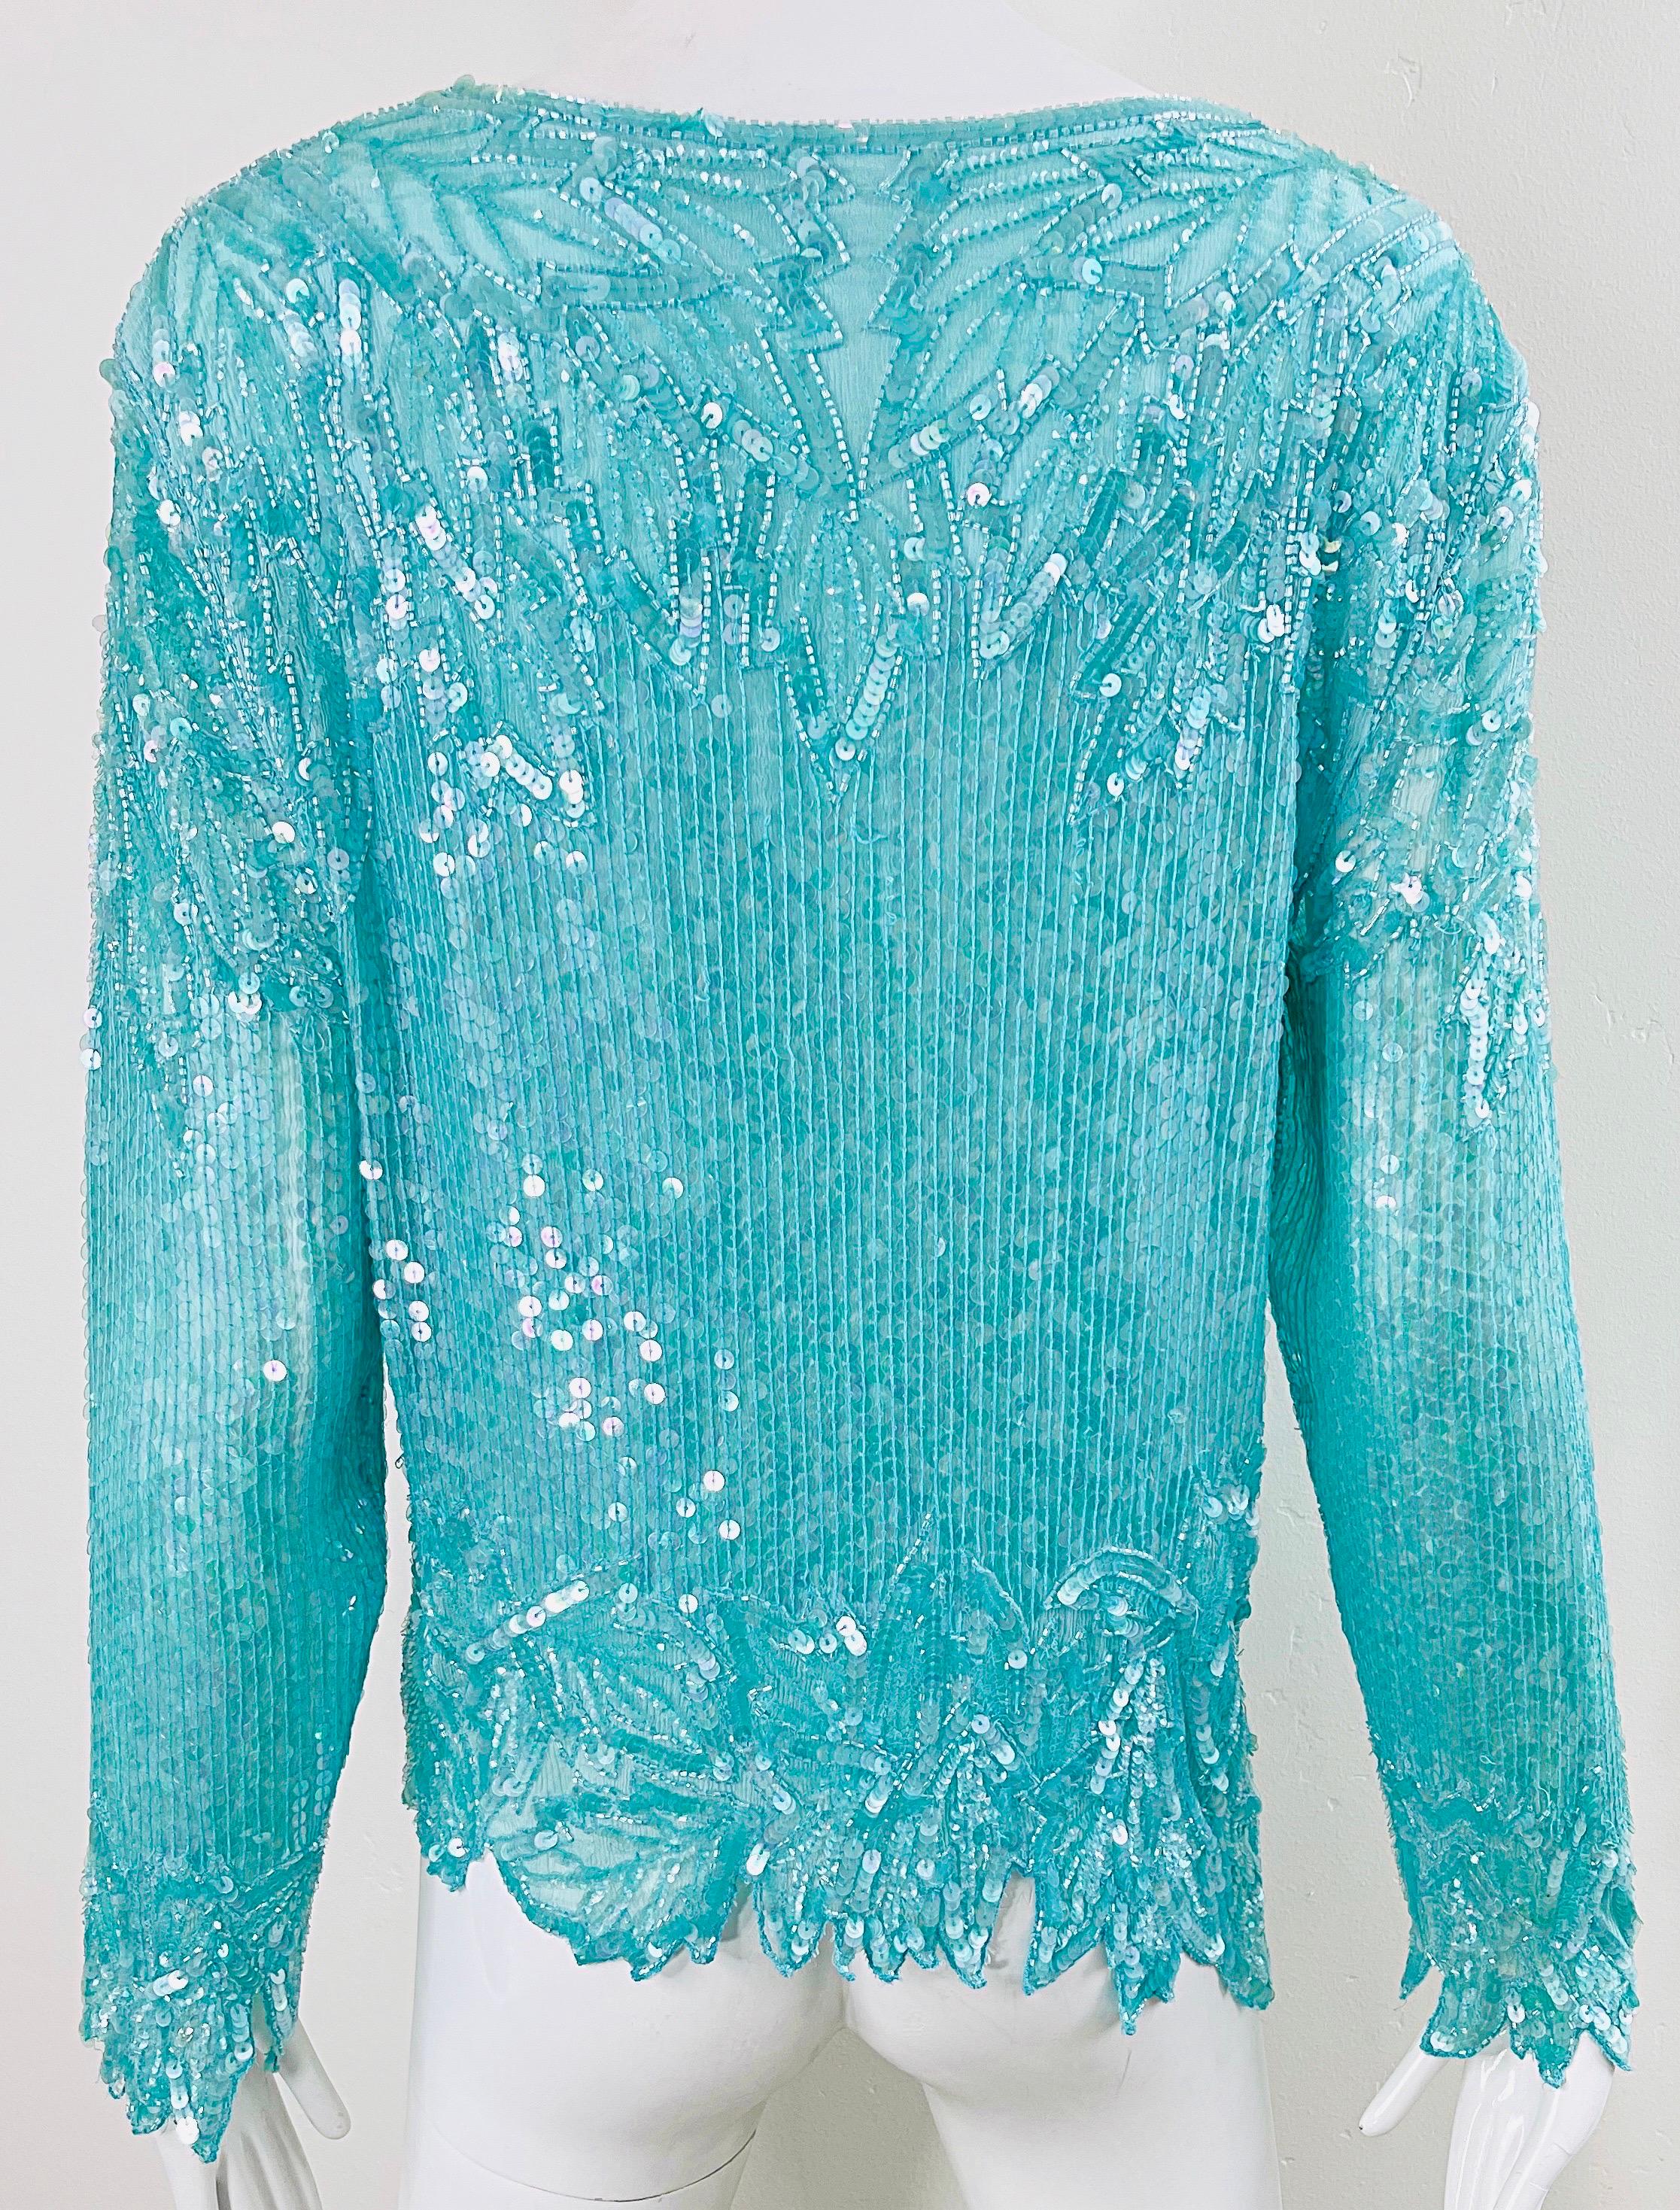 Beautiful late 80s SWEE LO turquoise blue silk chiffon sequin and beaded long sleeve top ! Features thousands of hand-sewn iridescent sequin and beads throughout the entire shirt. Asymmetrical scalloped hem and sleeves. Hook-and-eye closure at top